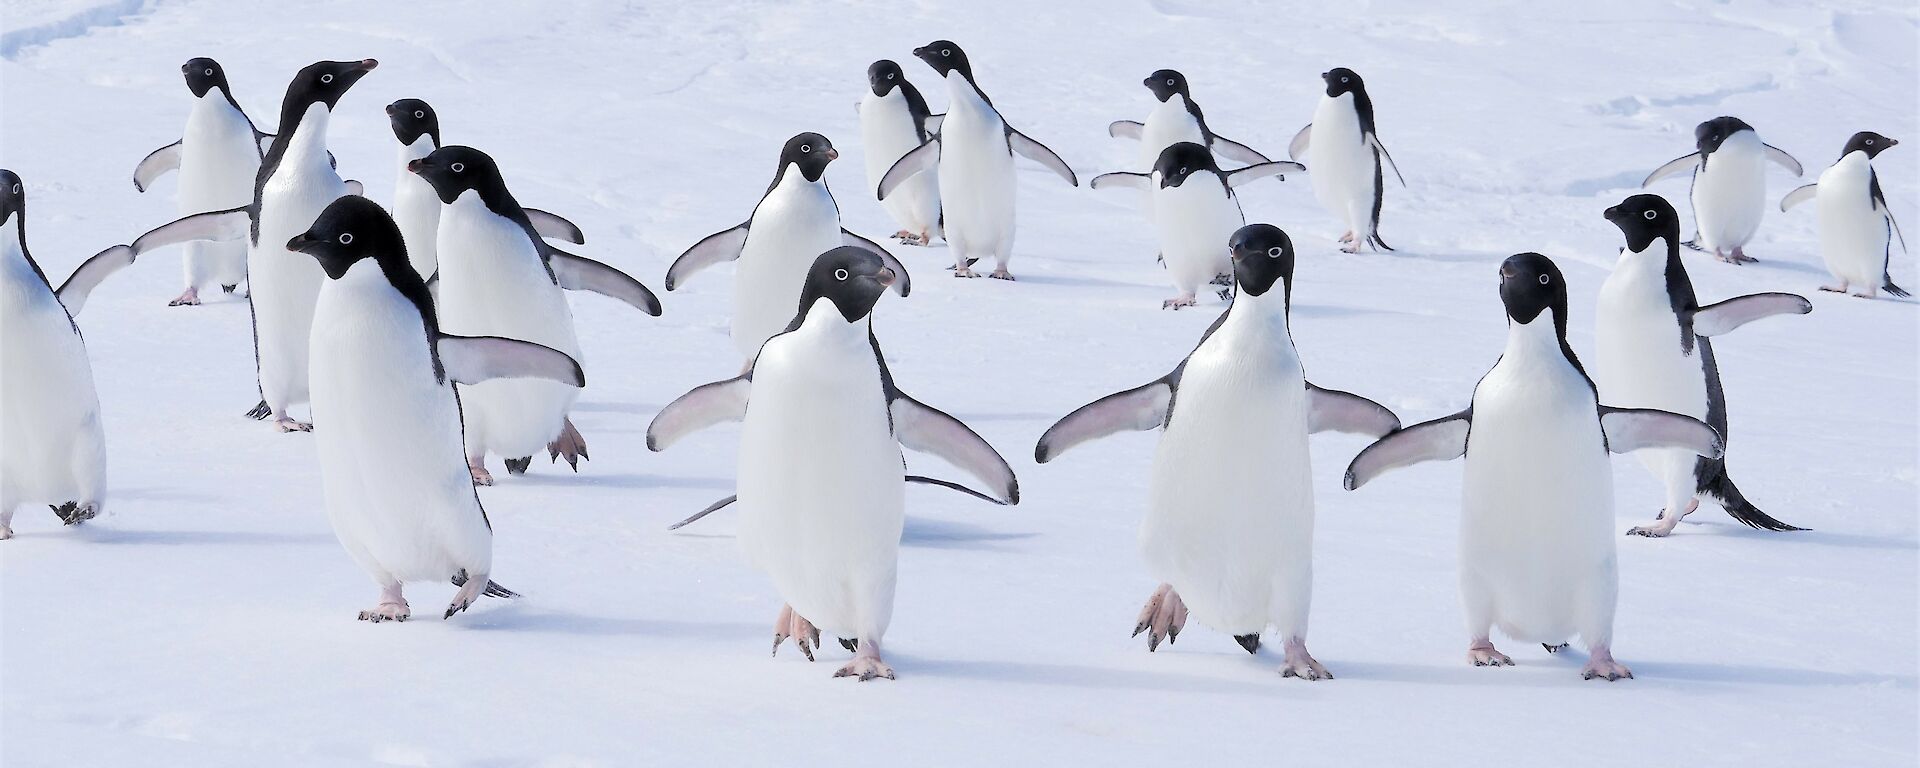 A group of Adelie penguins running towards the camera